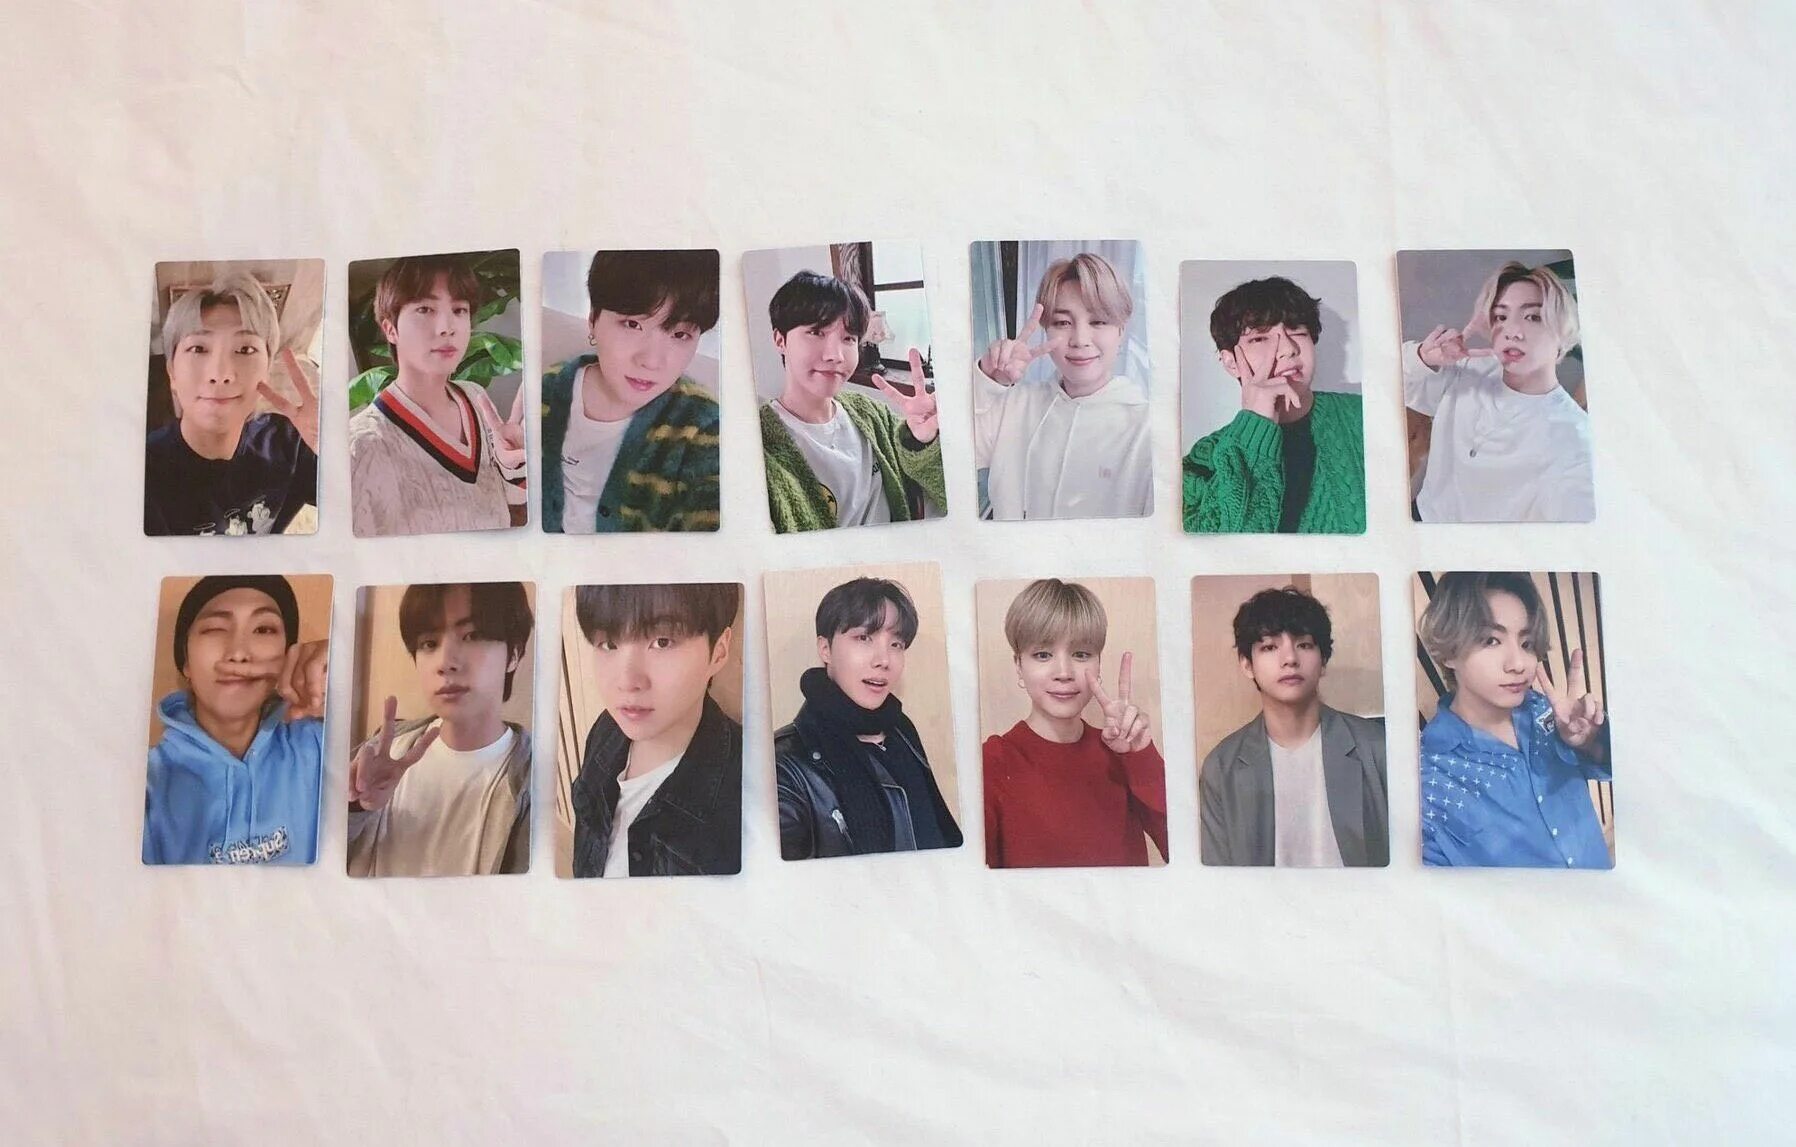 Butterfly lucky draw event чонгук. \ BTS - be (Essential Edition) Photocard. BTS be Essential Edition Photocards. BTS be album Photocards. BTS Photofolio Photocard.